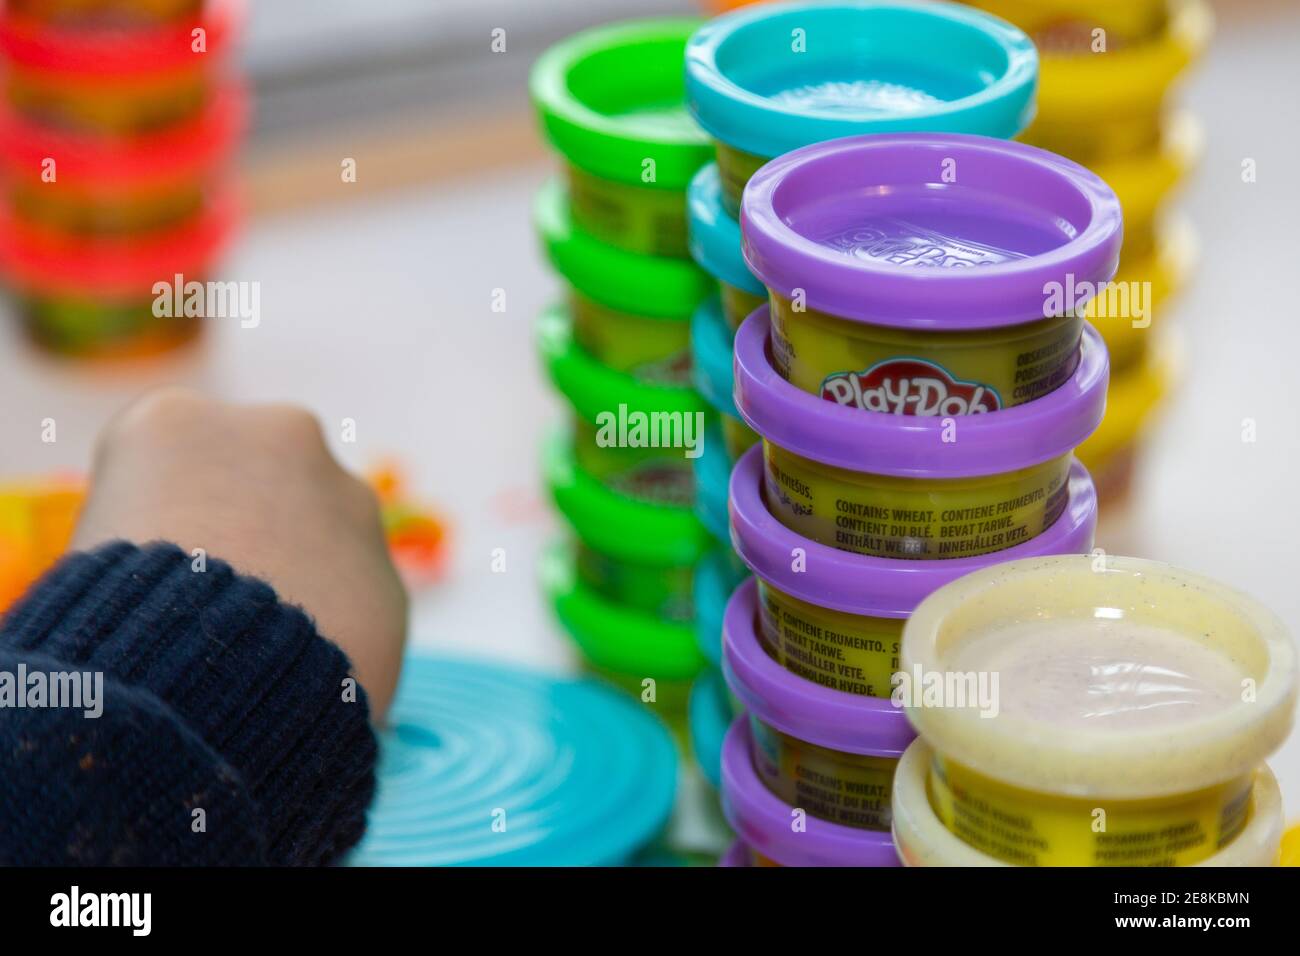 A child playing with Play Doh modelling clay at a table Stock Photo